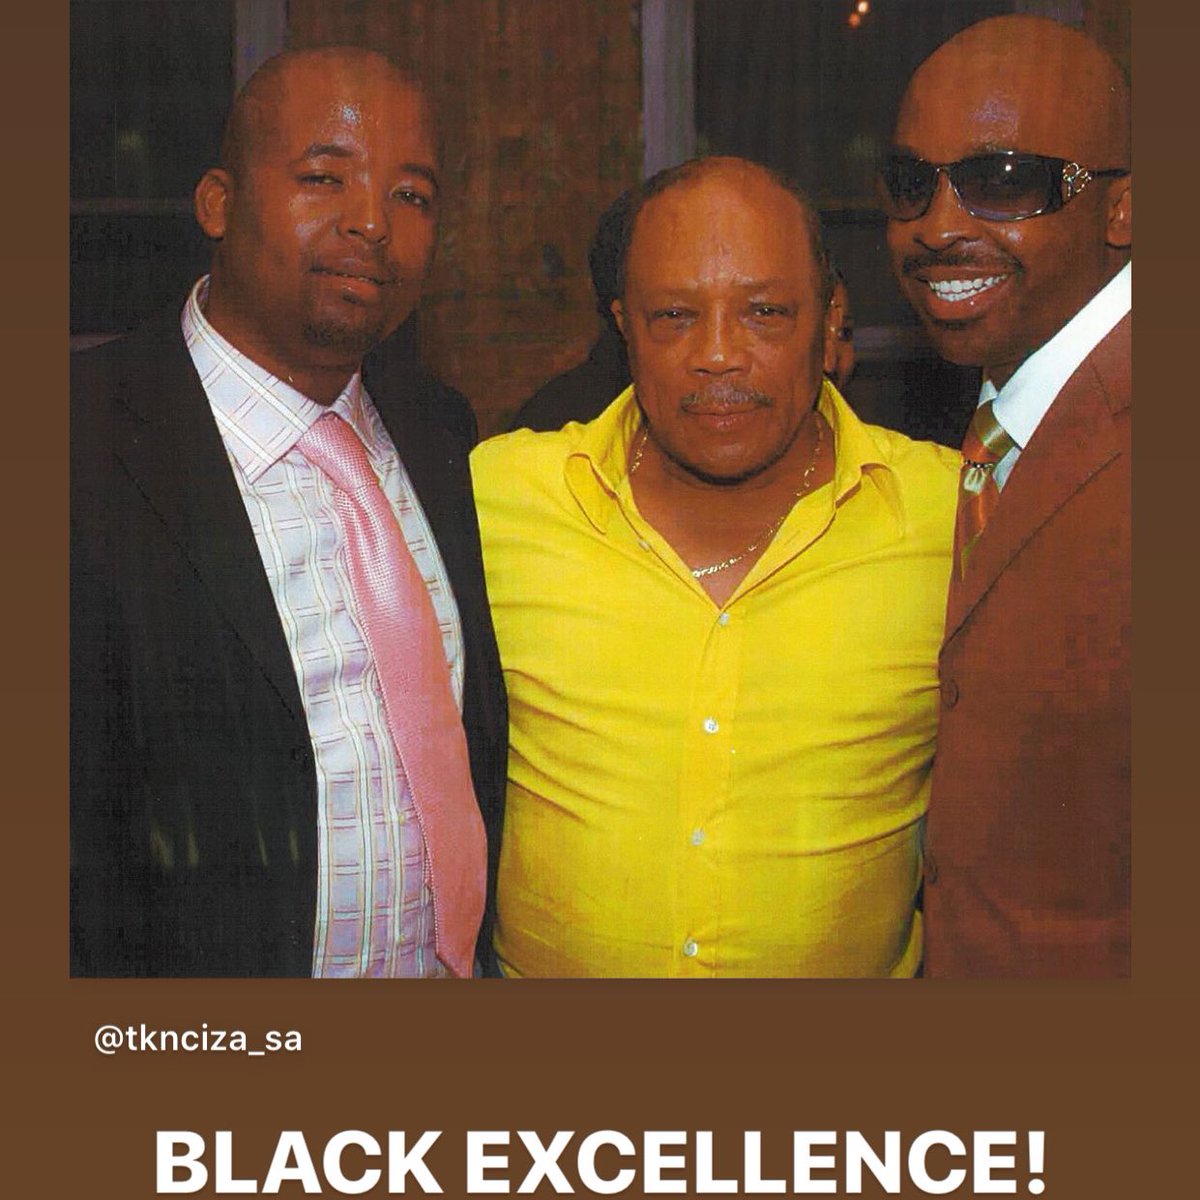 TS records didn’t enter the music business in the best of times for black executives. International music was bringing in big money will CDs and that mean cassette dominant local music was not as profitable and the big international labels had not reason to invest in it. They did